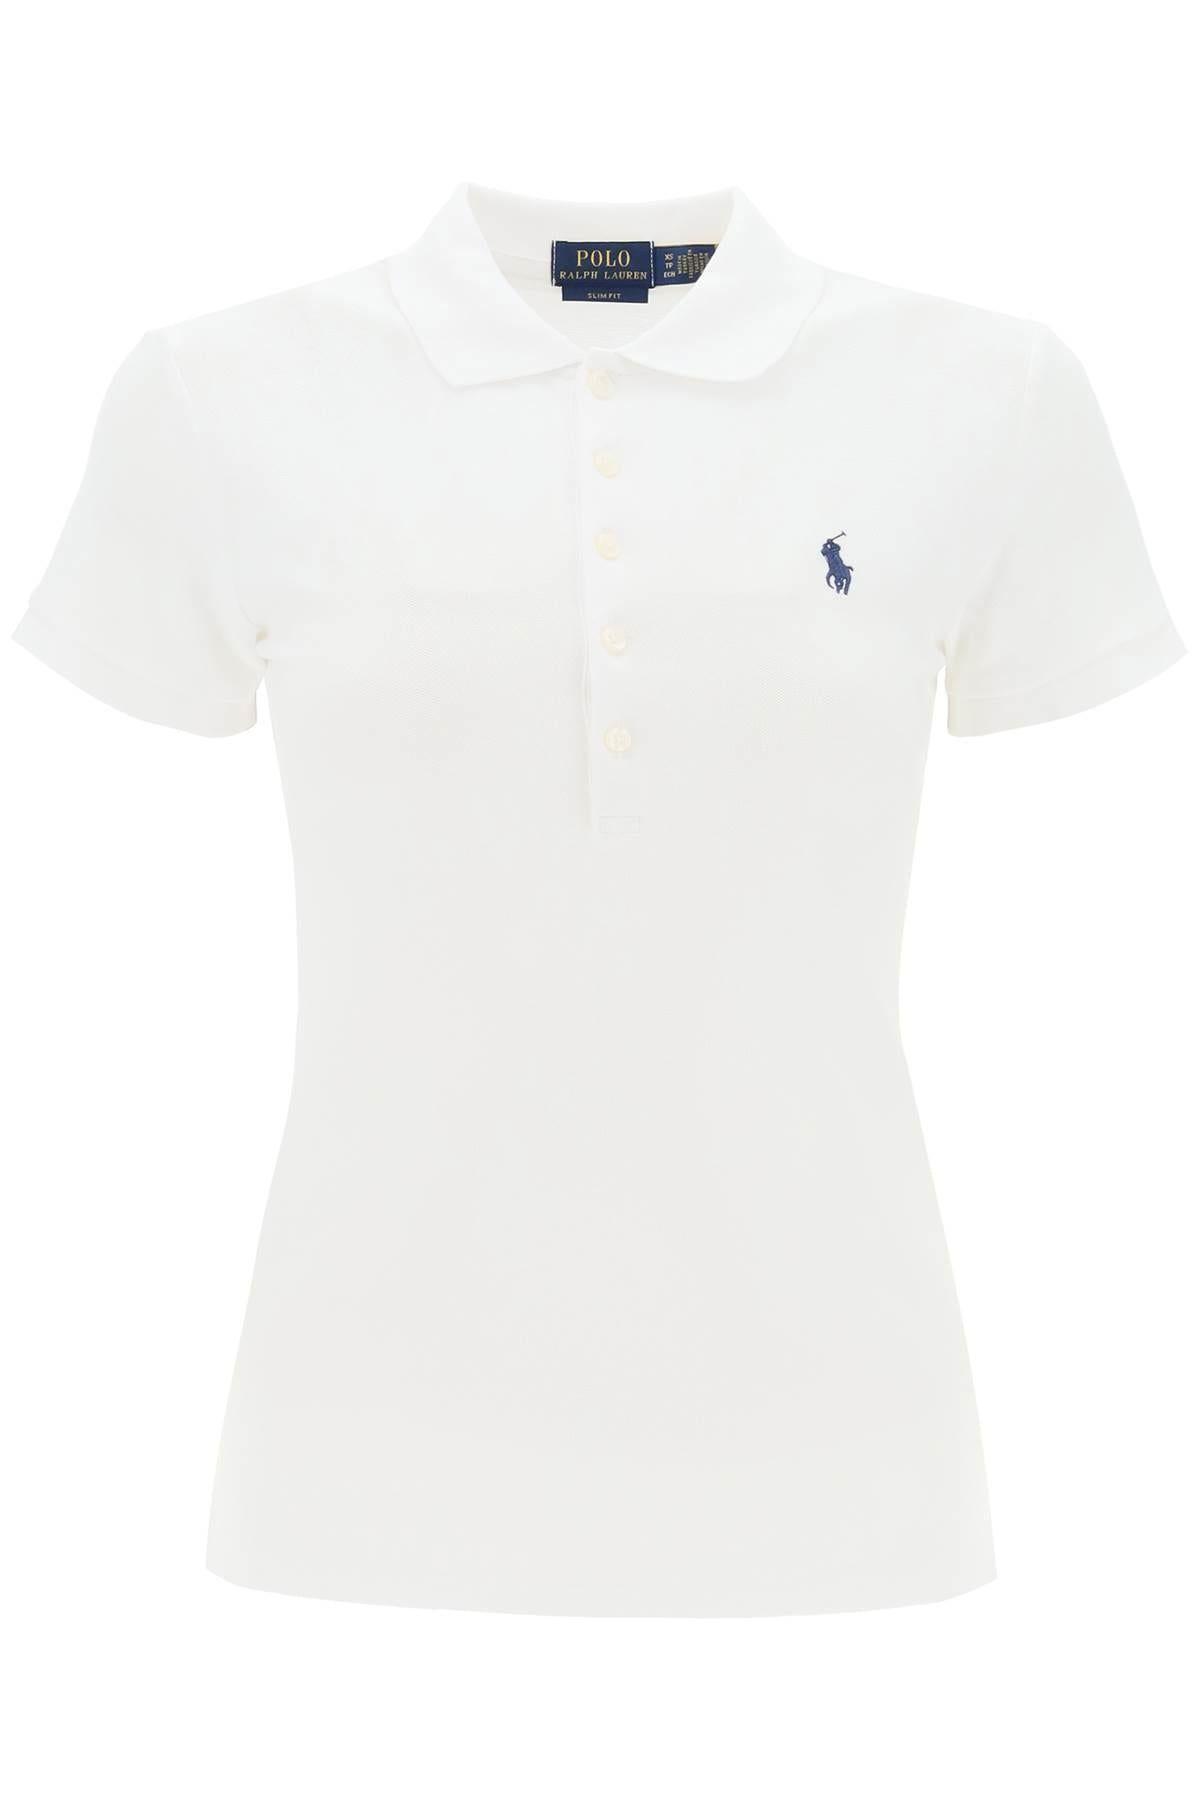 Polo Ralph Lauren Slim Fit Polo Shirt in White | Lyst